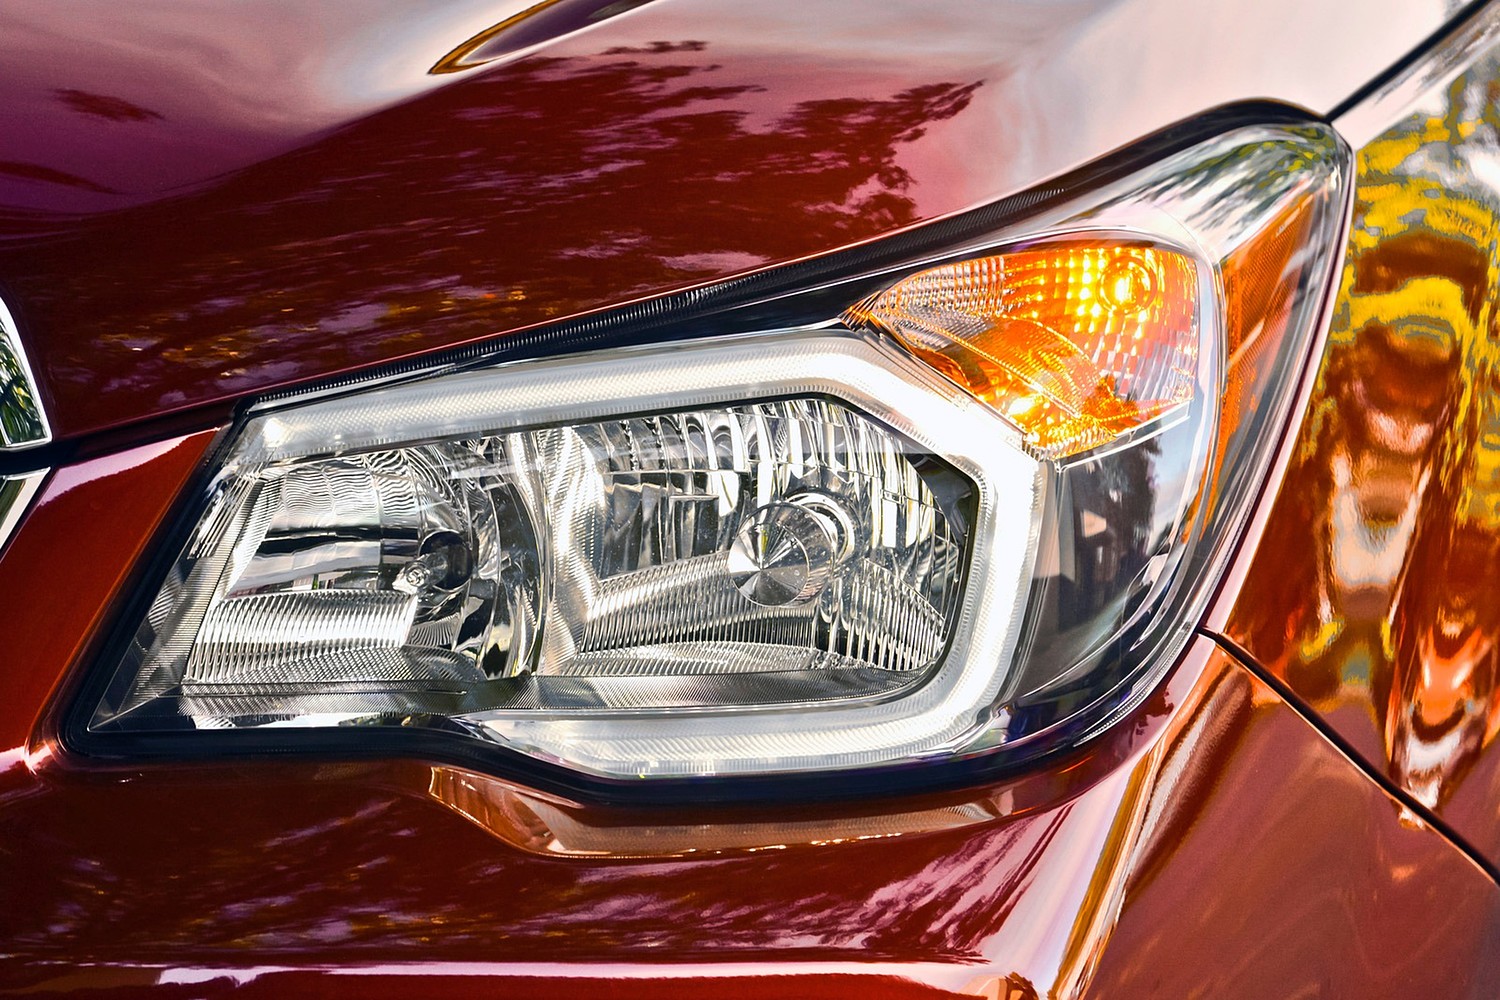 Subaru Forester 2.0XT Touring 4dr SUV Headlamp Detail (2015 model year shown)